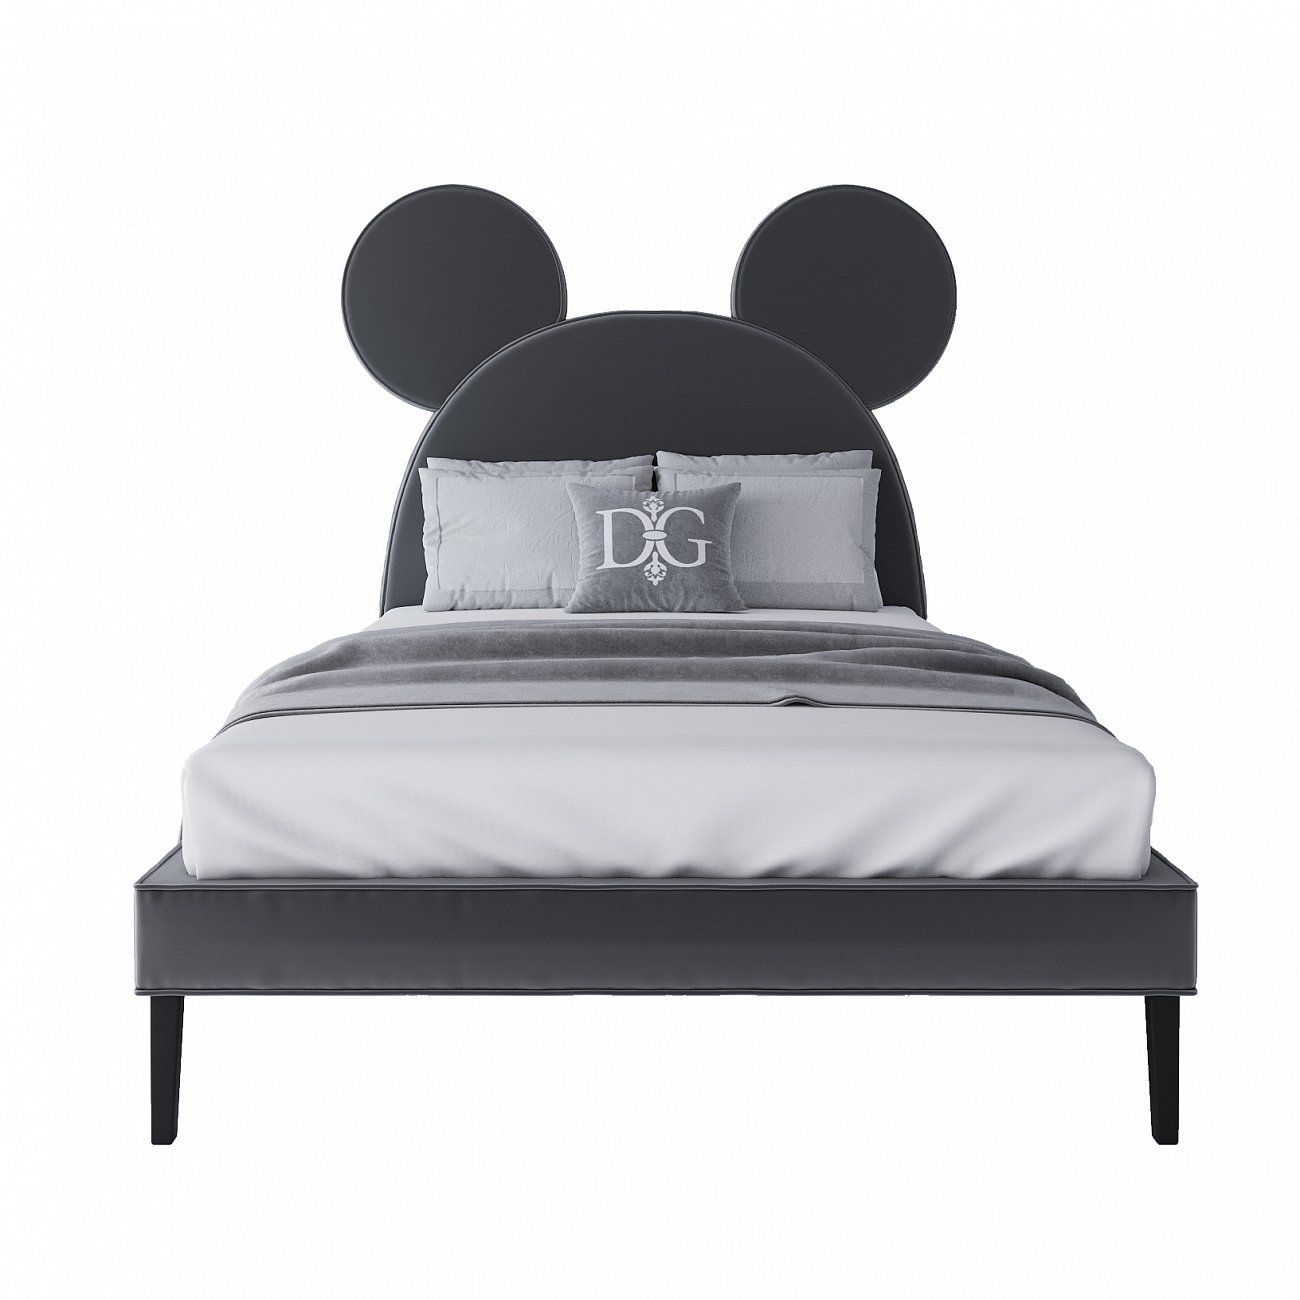 Children's bed 140x200 black Mickey Mouse